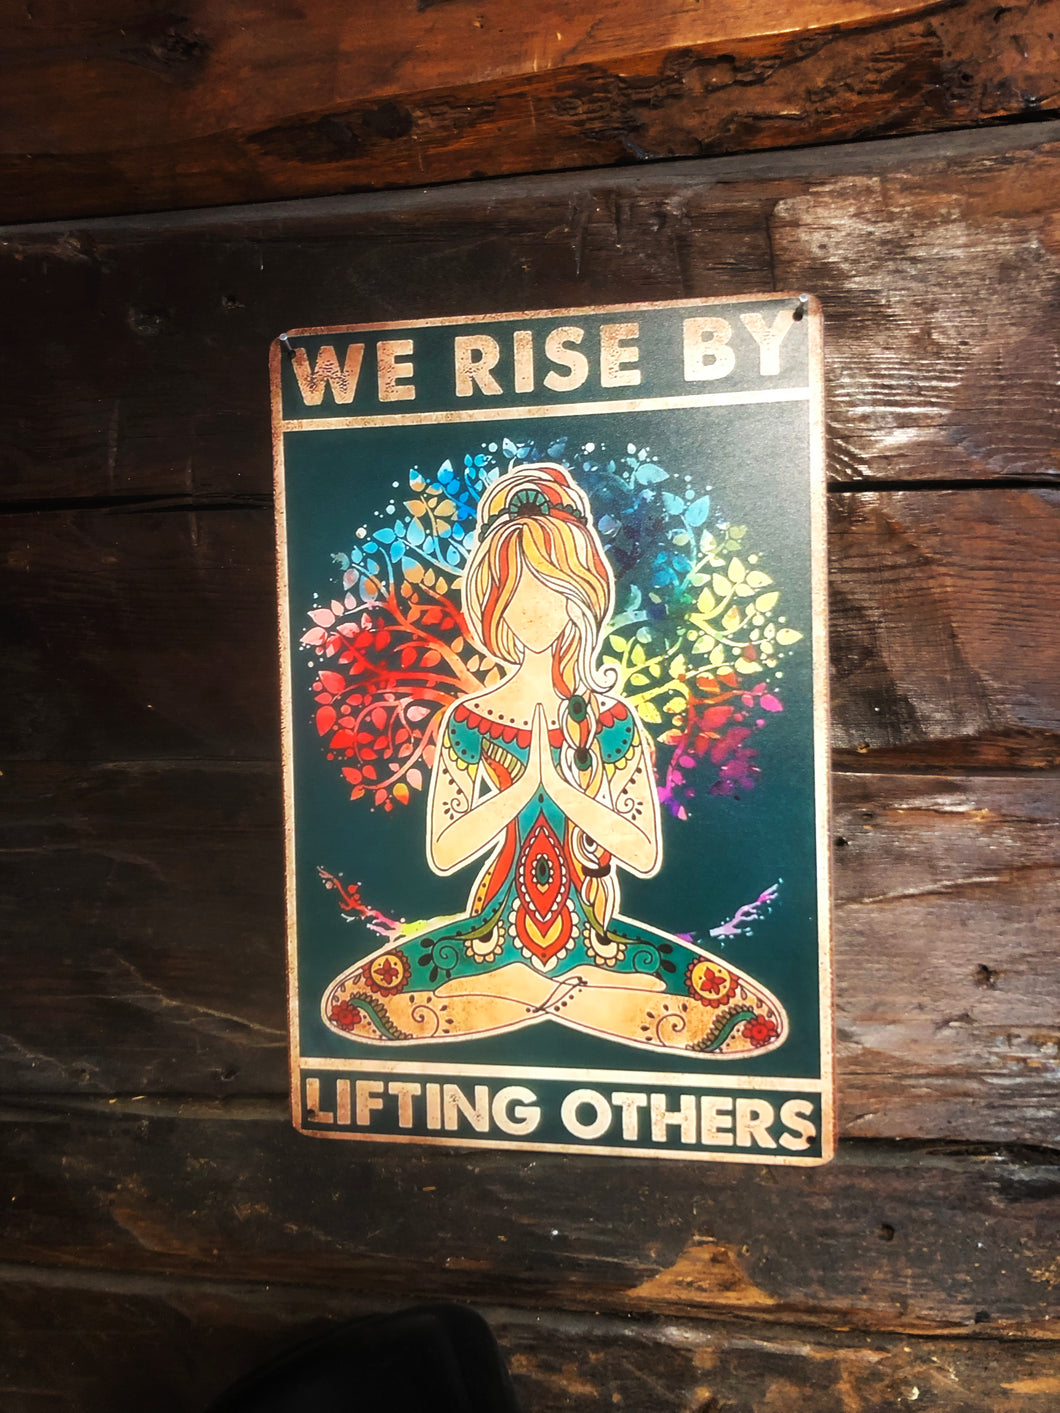 Tin sign - We rise by lifting others